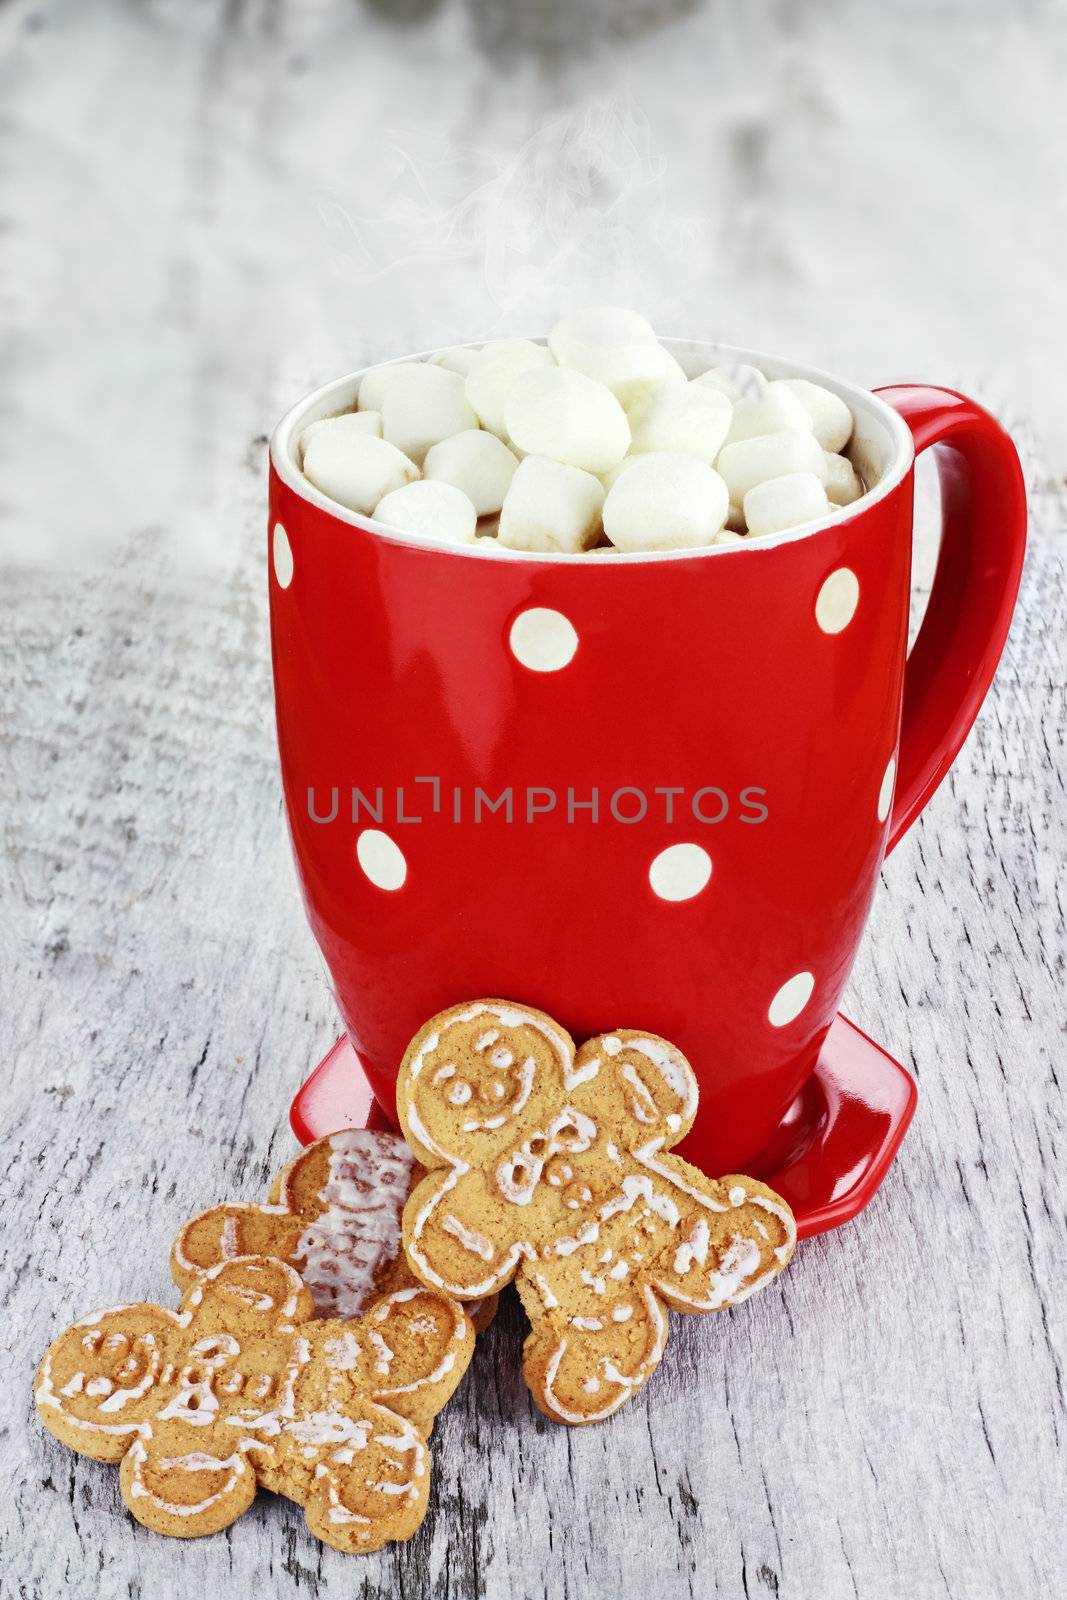 Cup of hot cocoa with marshmallows and cookies on a rustic background.

